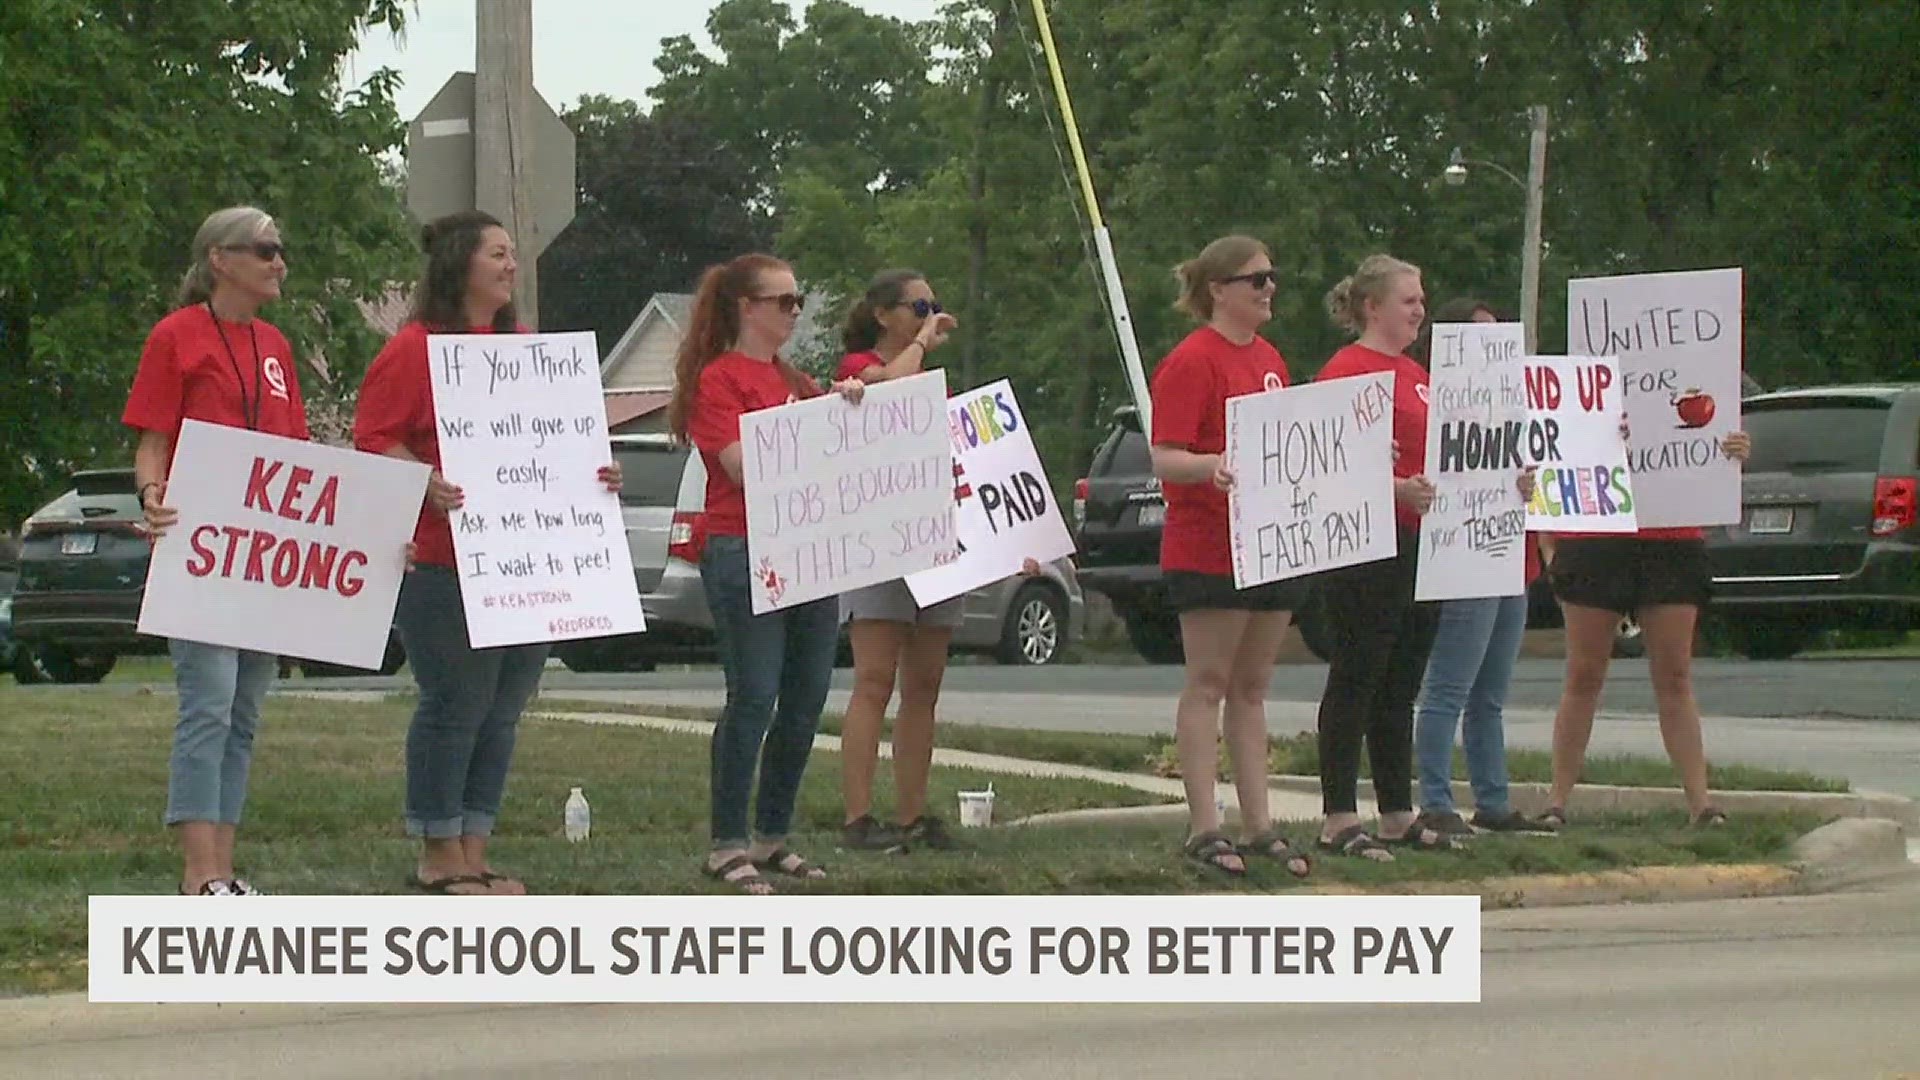 Over two dozen employees and supporters were lined up with signs on Main Street, getting many honks of approval from drivers as pay negotiations continue.